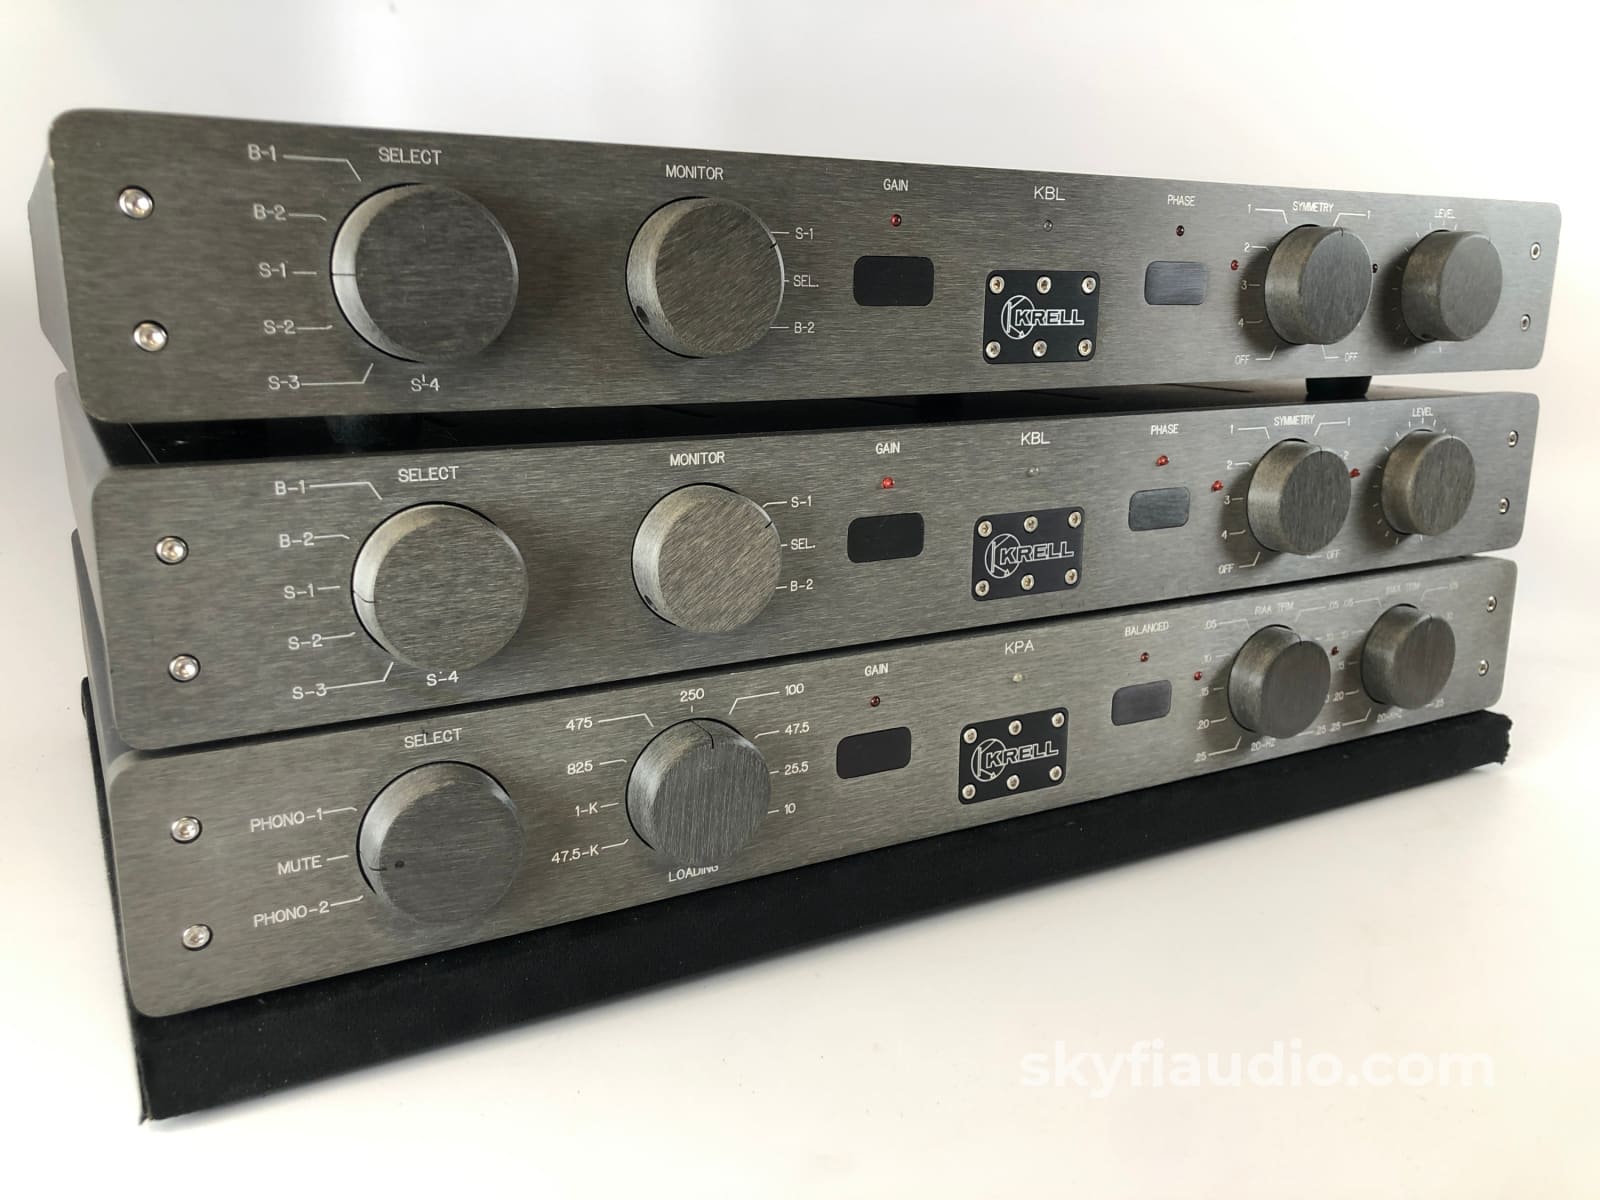 Krell Kbl Dual Mono Preamp Stack With Kpa Phono Section - Wow! Preamplifier